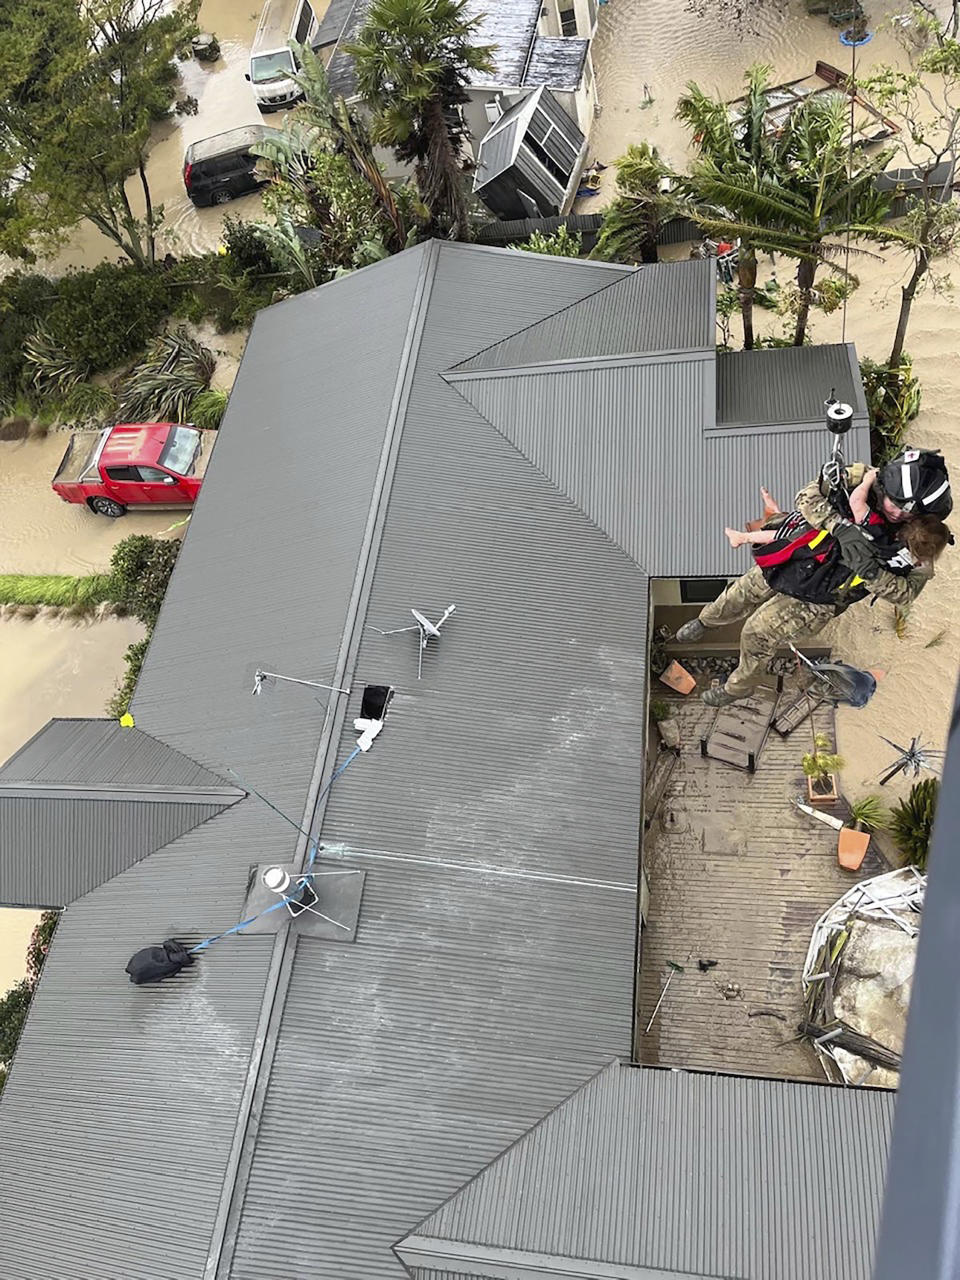 In this image released by the New Zealand Defense Force on Wednesday, Feb. 15, 2023, a child is winched from a rooftop of a home to safety by helicopter in the Esk Valley, near Napier, New Zealand. The New Zealand government declared a national state of emergency Tuesday after Cyclone Gabrielle battered the country's north in what officials described as the nation's most severe weather event in years. (New Zealand Defense Force via AP)